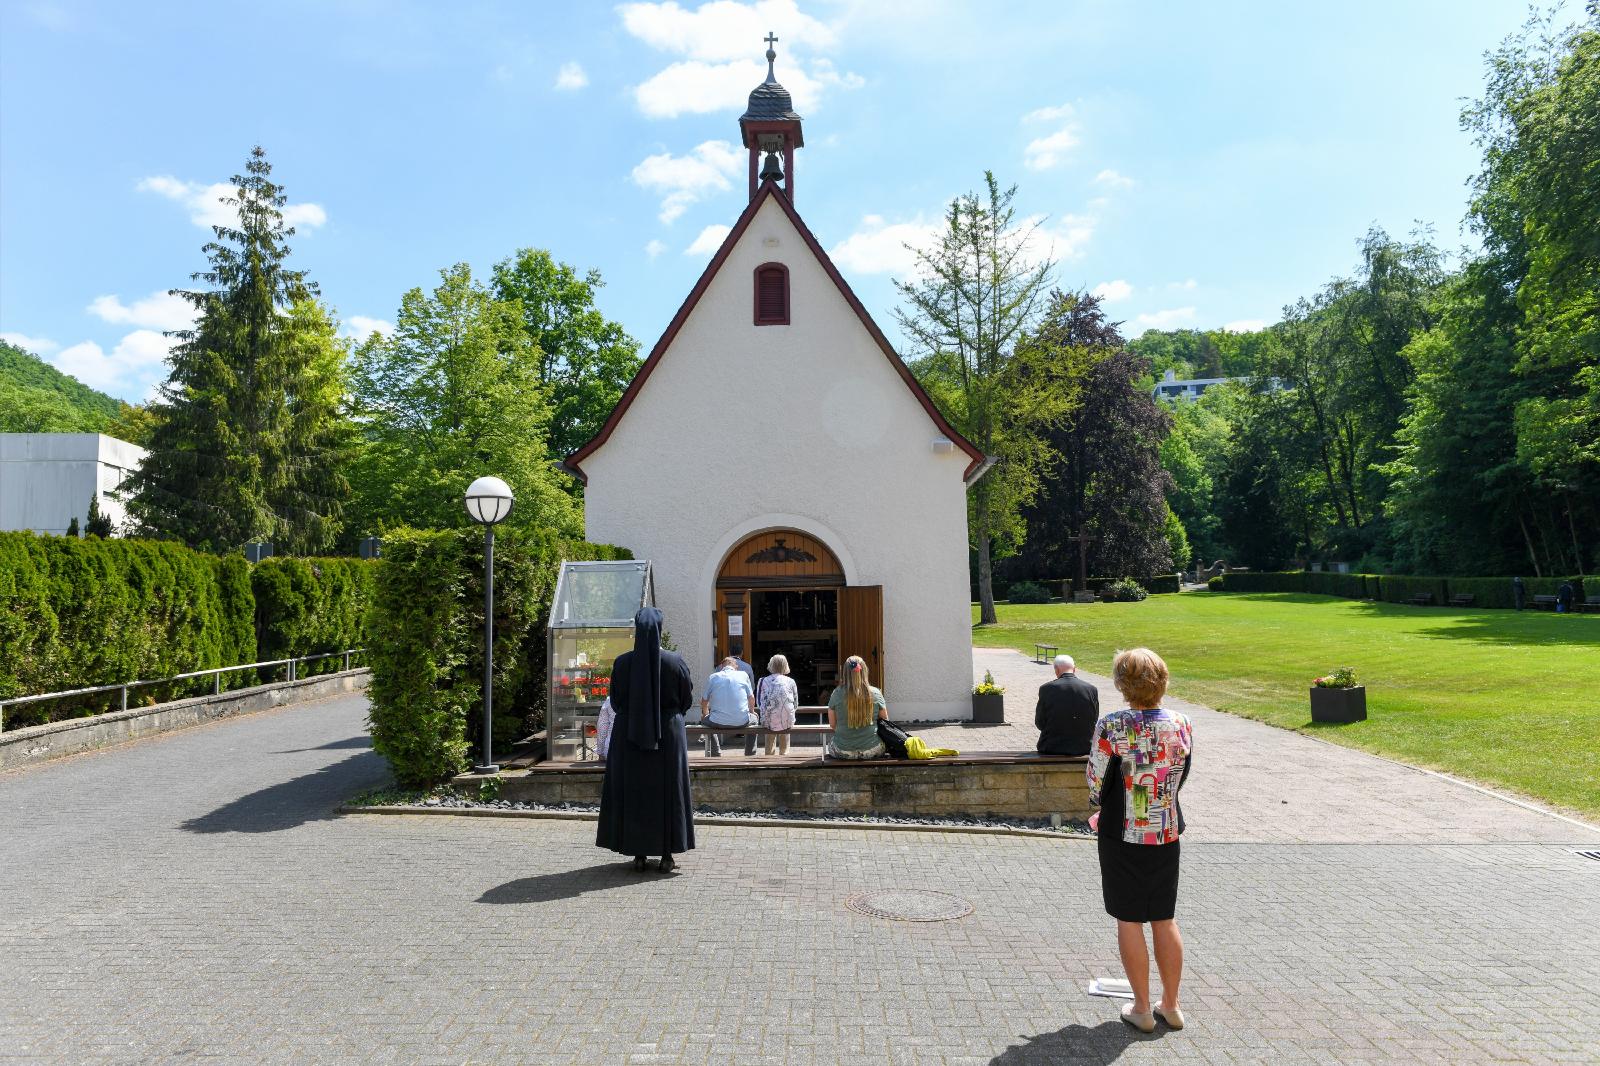 Bishop orders new look at claims against Schonstatt founder